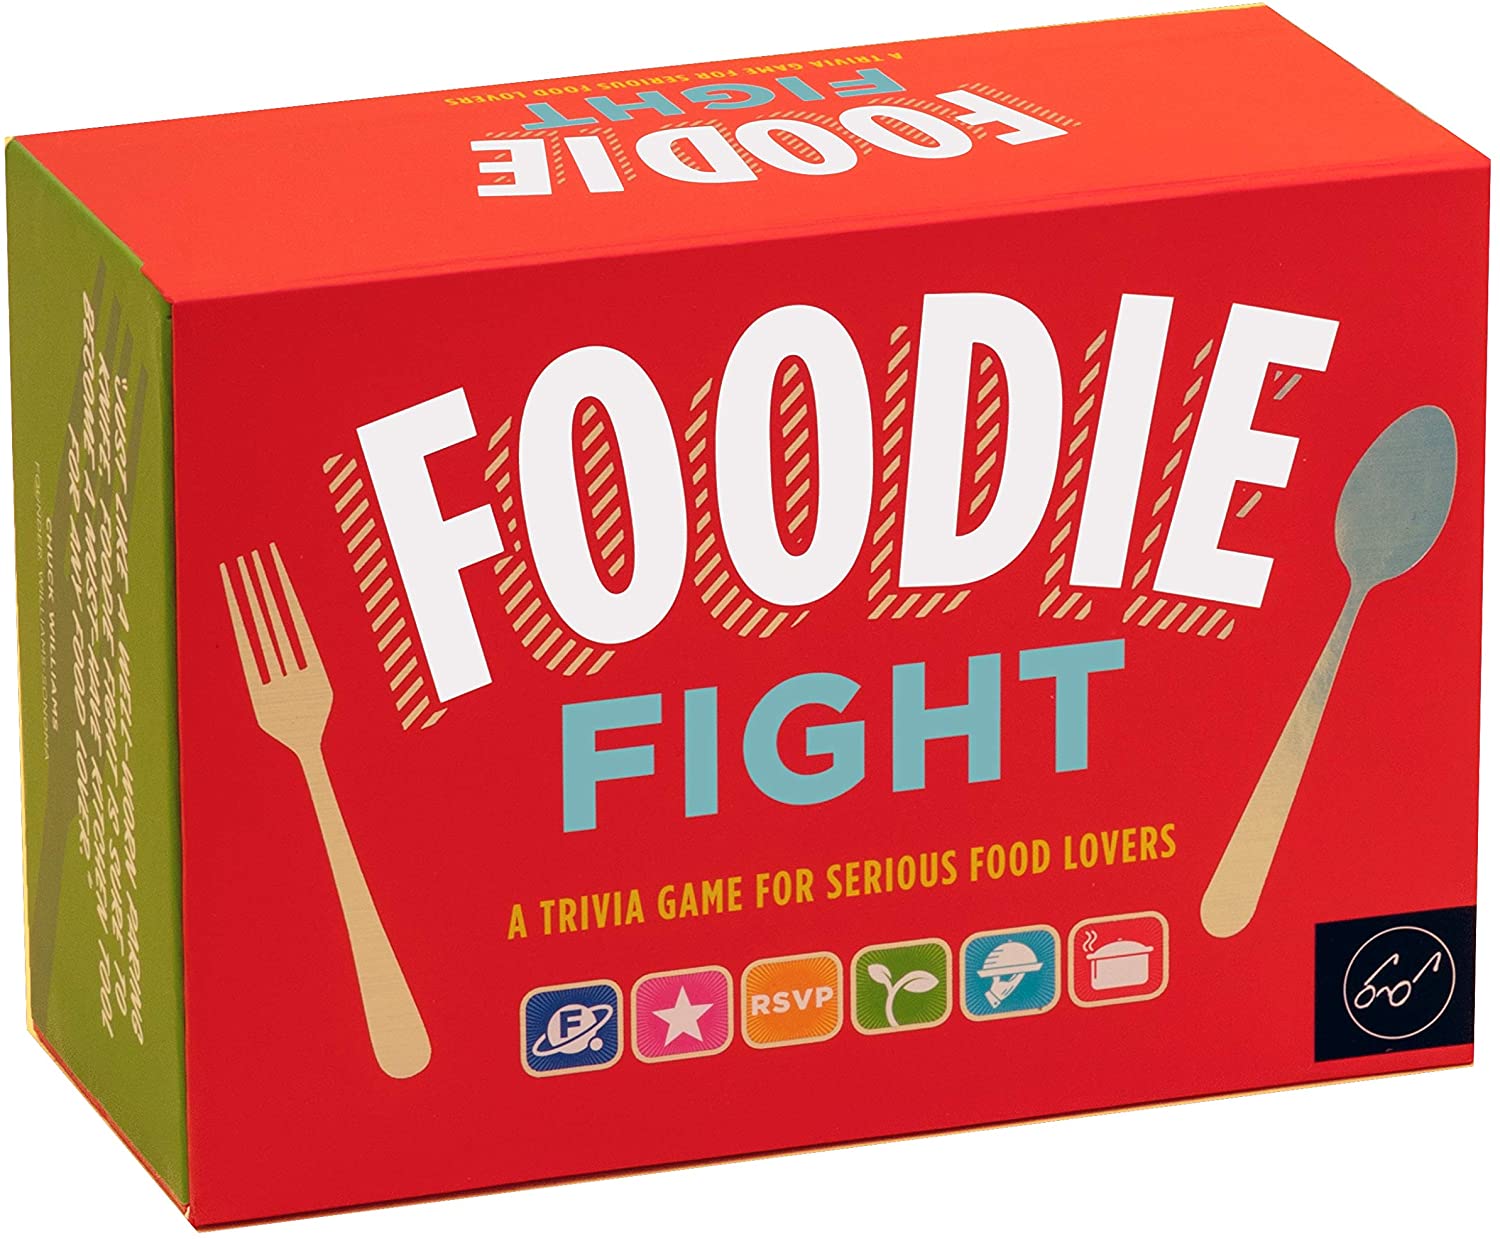 Foodie Fight Revised- A Trivia Game for Serious Food Lovers